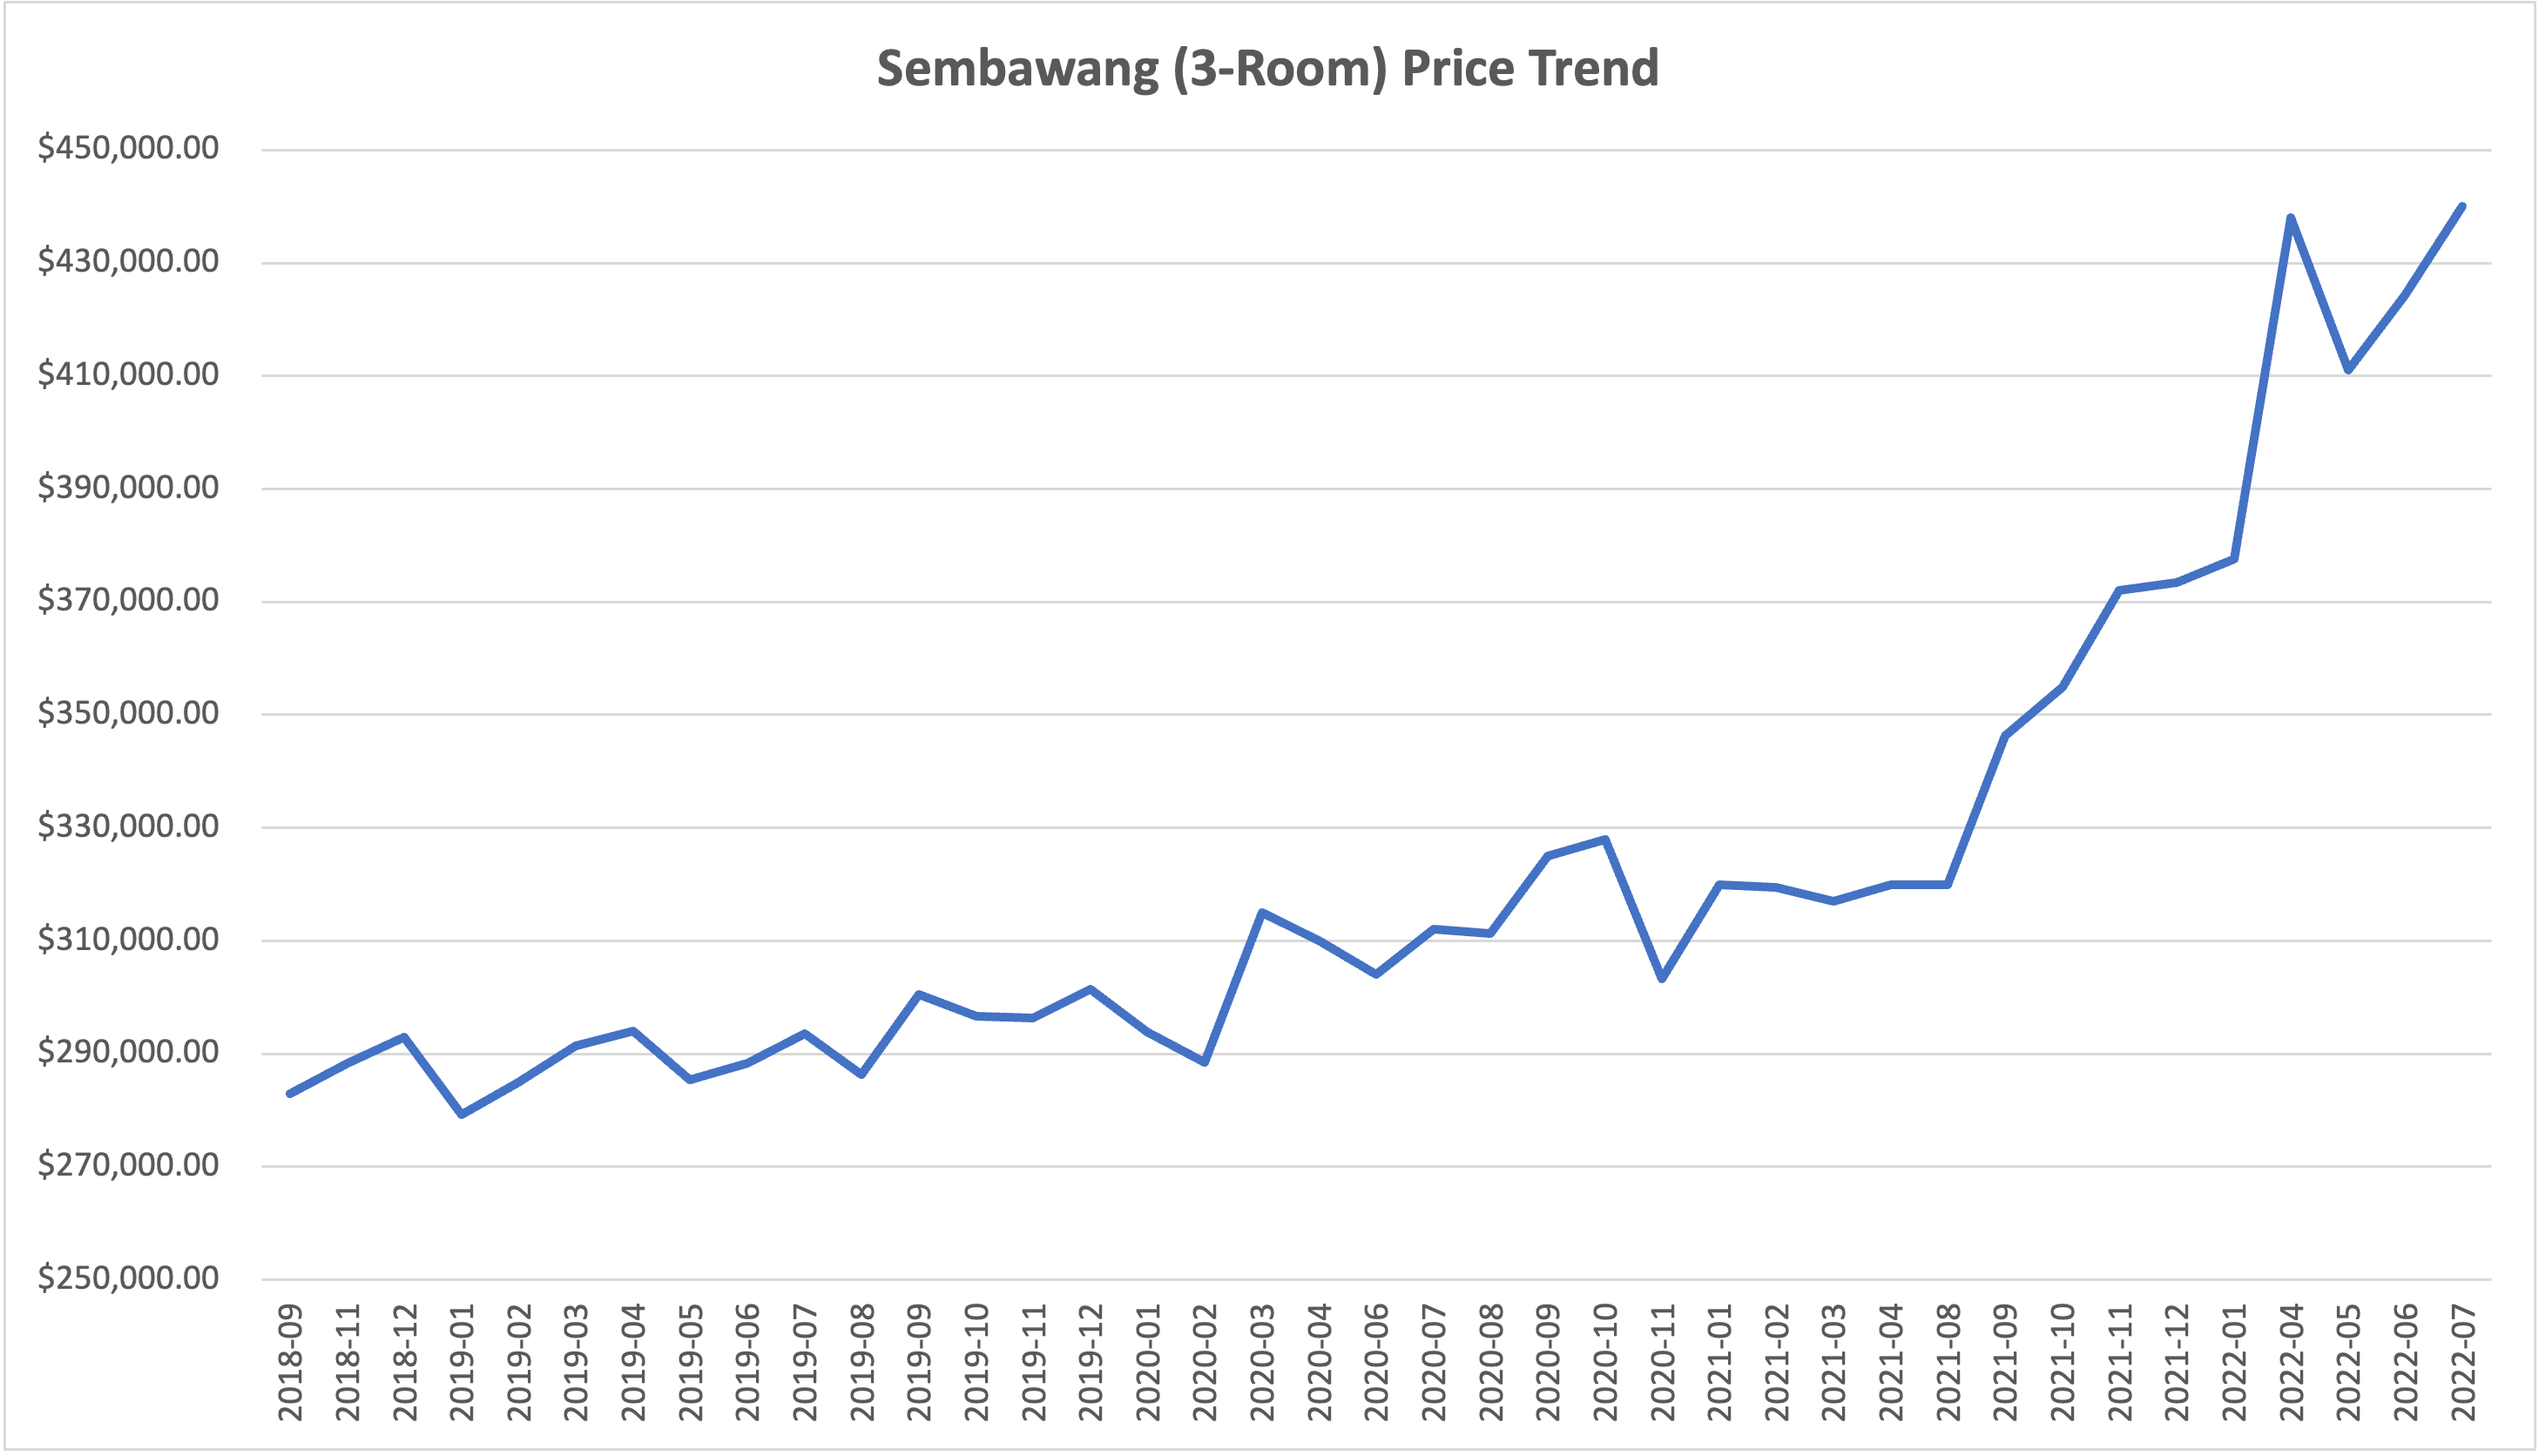 Sembawang 3-room price trend from 2018 to 2022